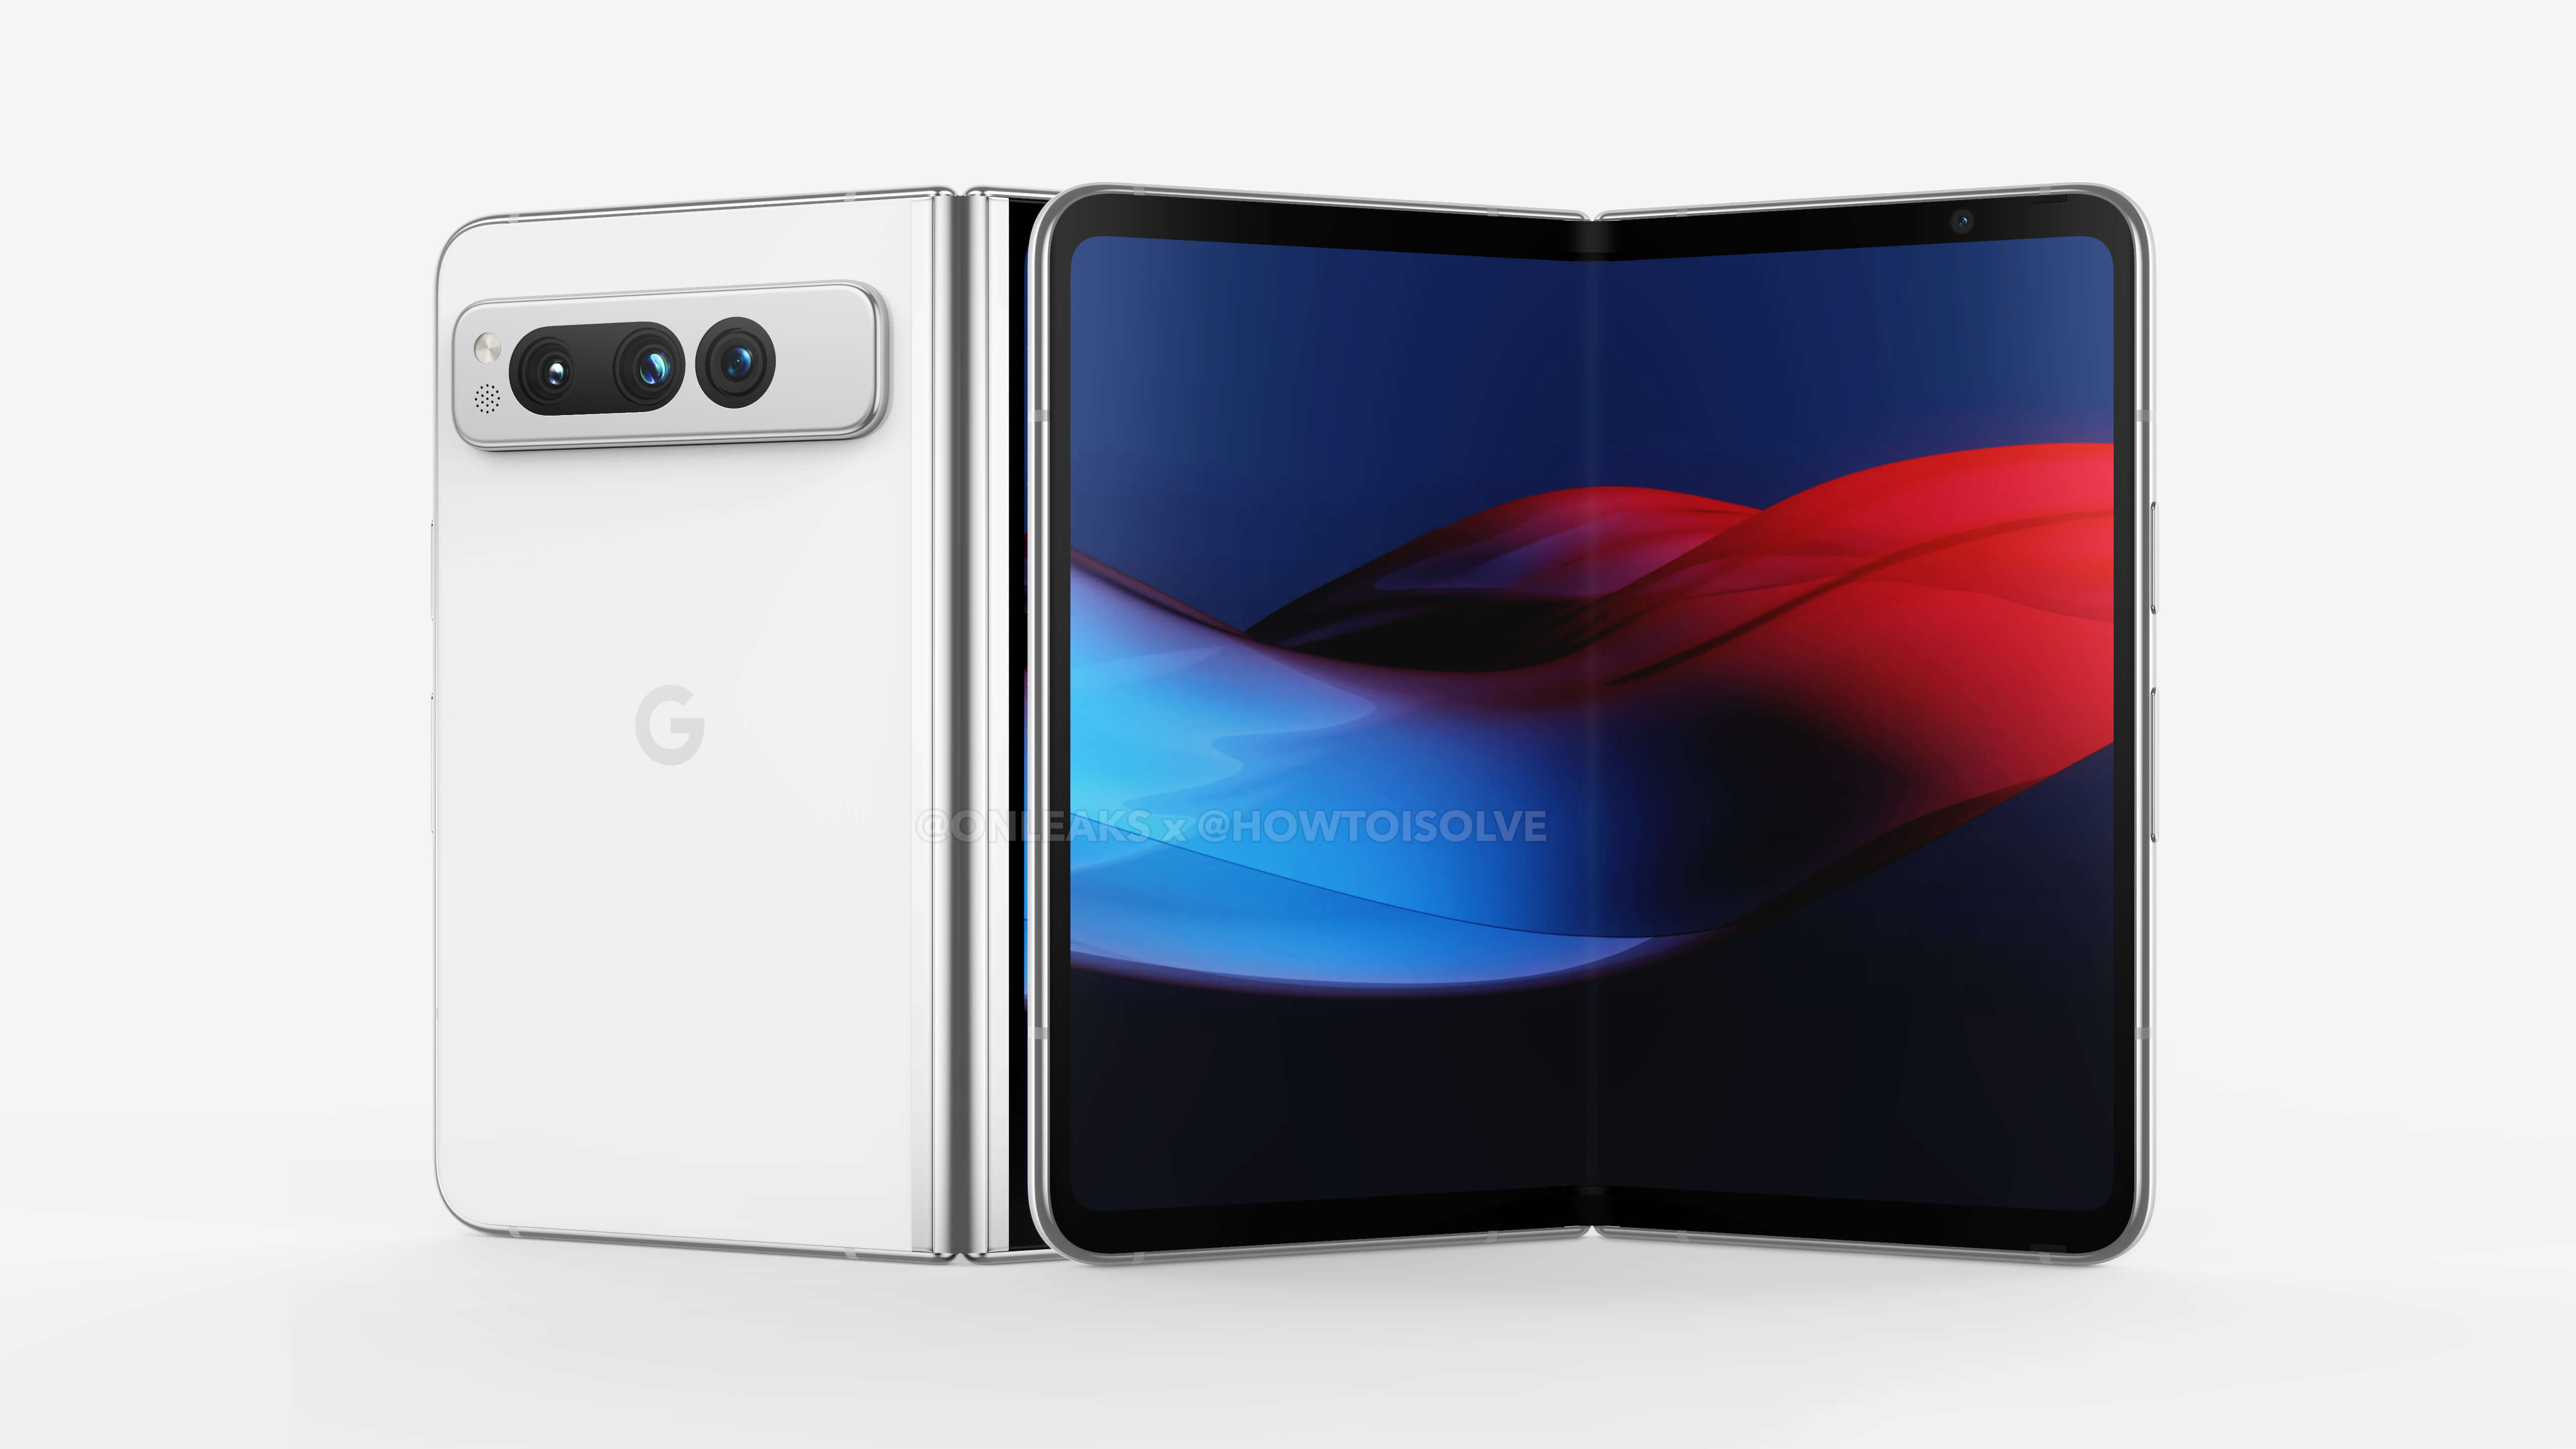 OnLeaks shared quality images and features of the Pixel Fold smartphone